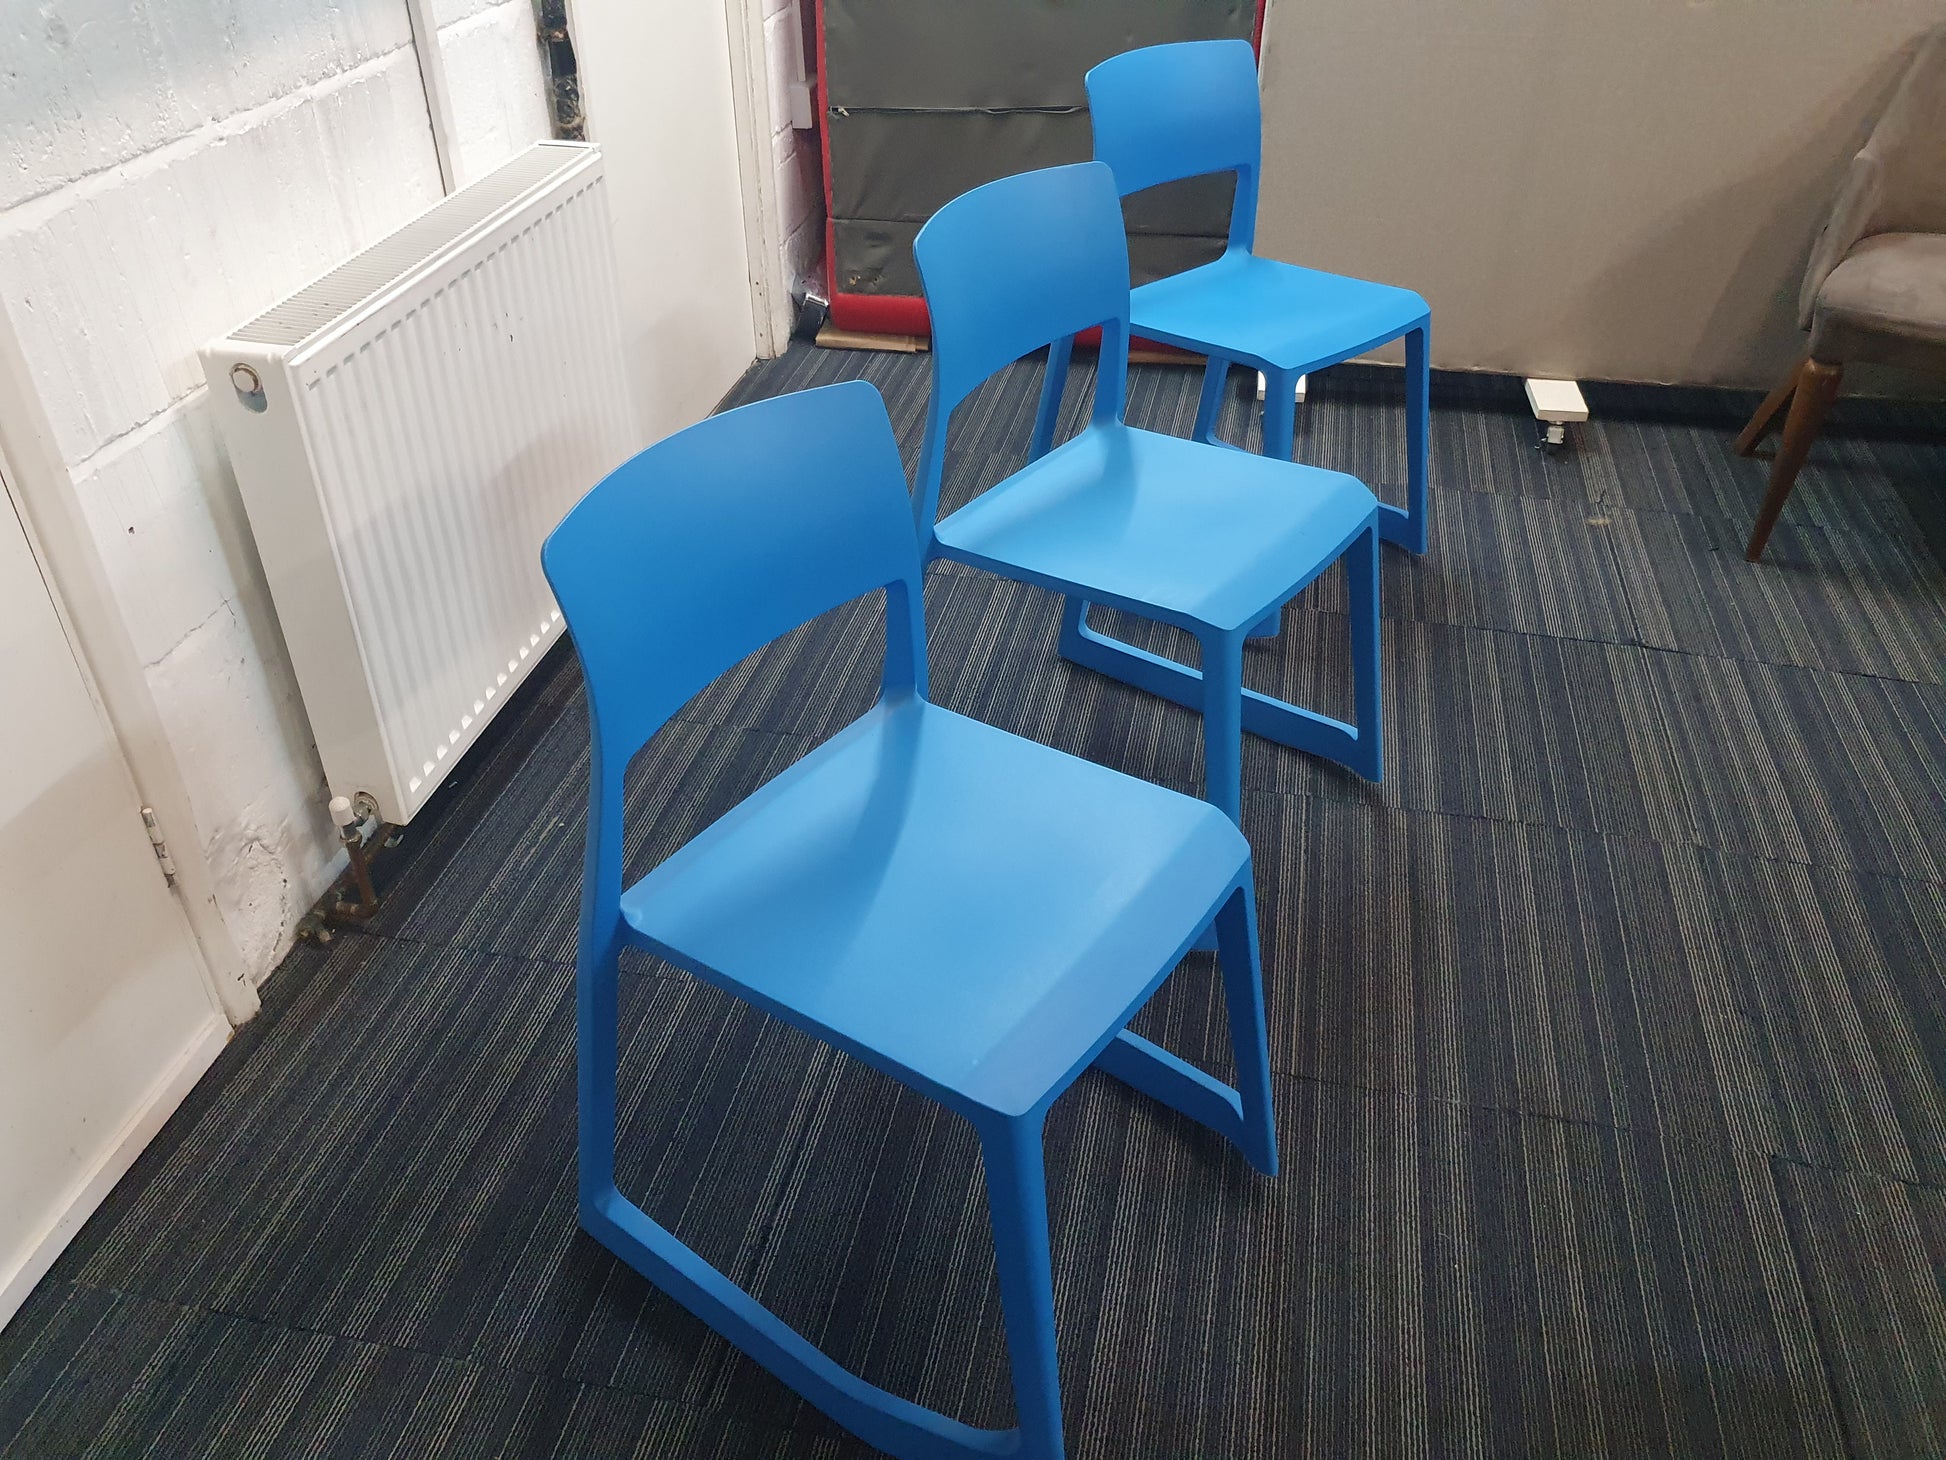 Three blue waiting area chairs in a row